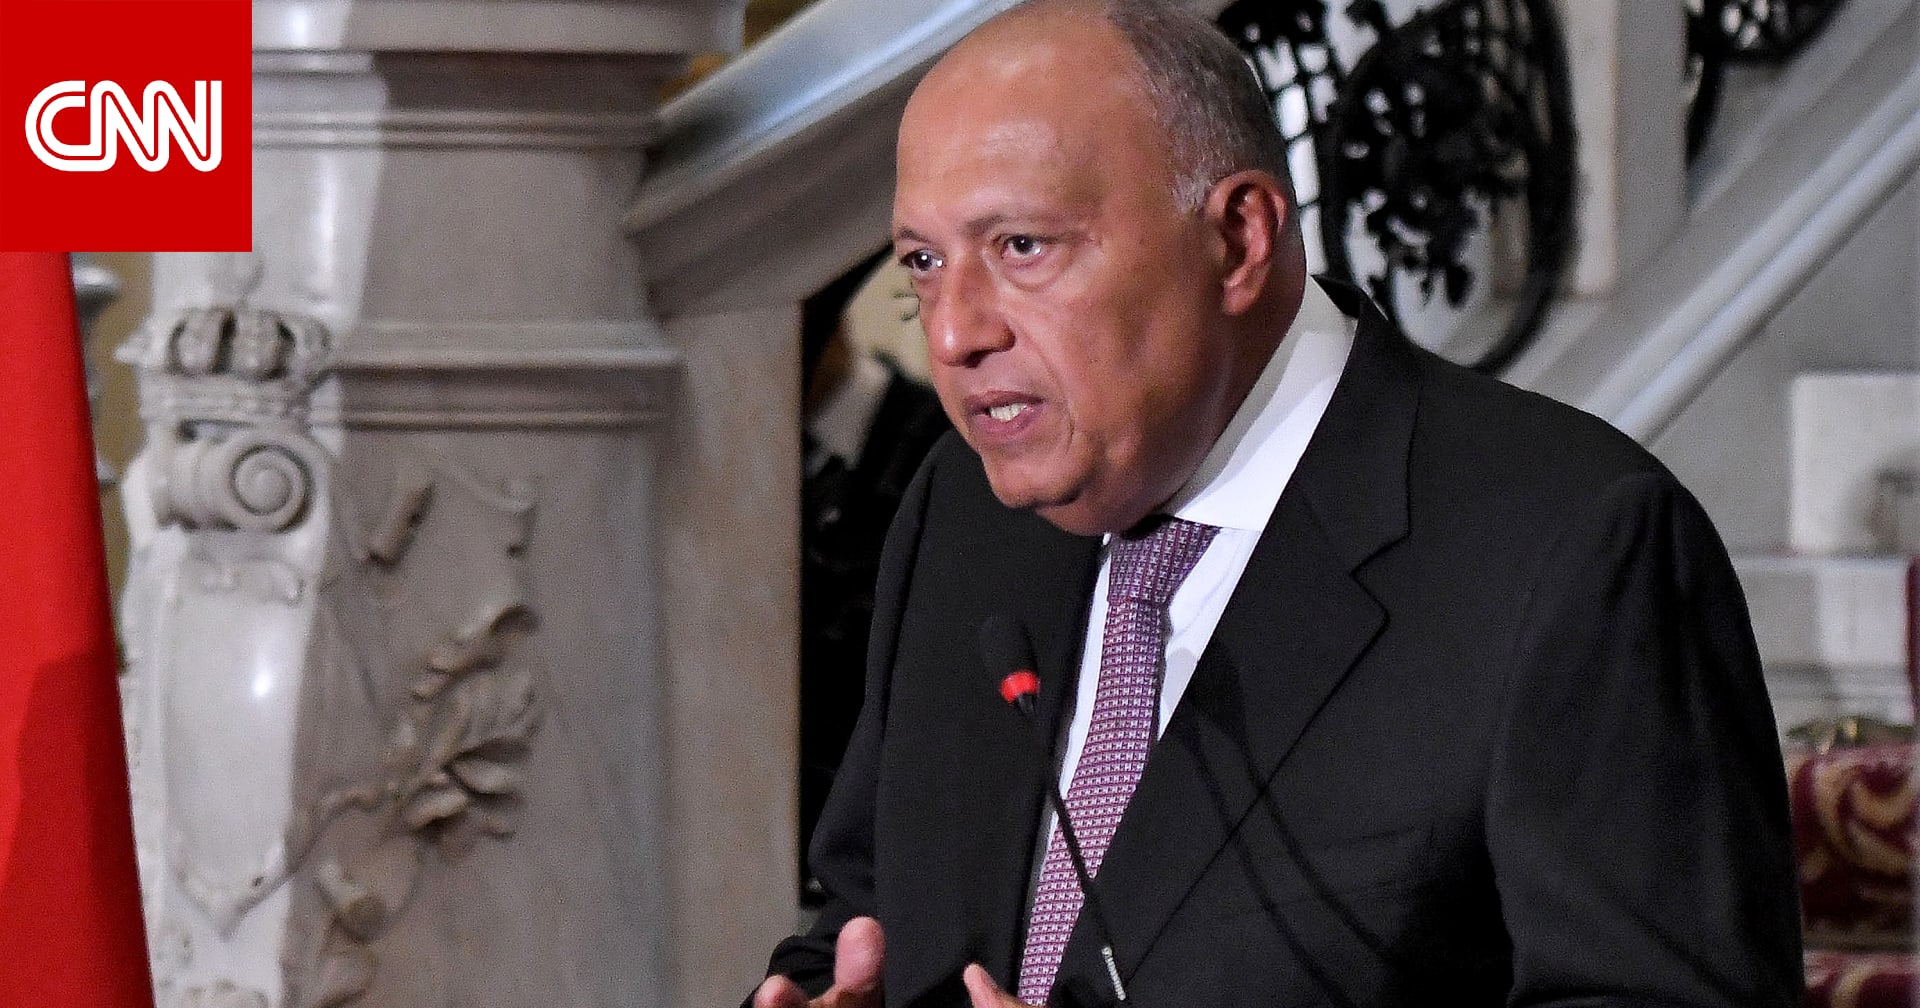 In response to its finance minister’s statements, Sameh Shukri accused Israel of “outright war crimes.”